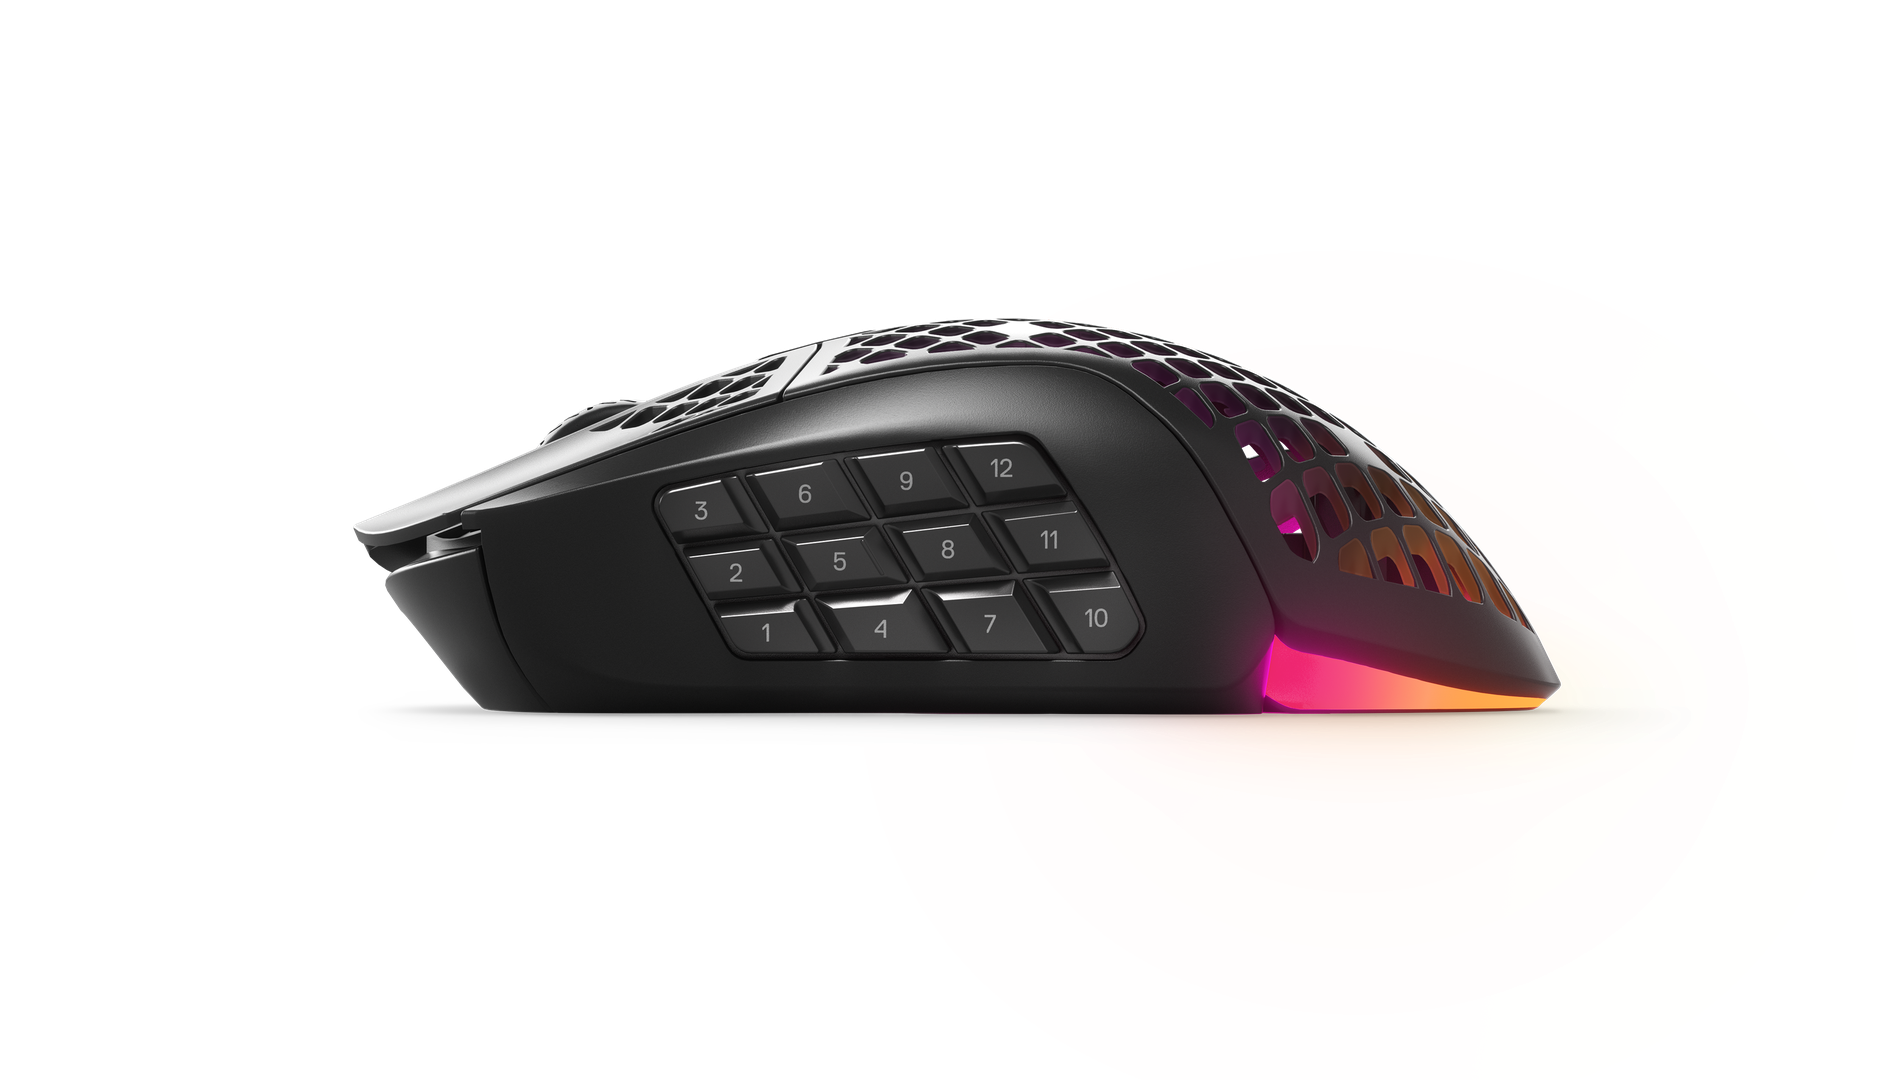 SteelSeries Aerox 9 Wireless Ultra Lightweight MMO/MOBA Mouse